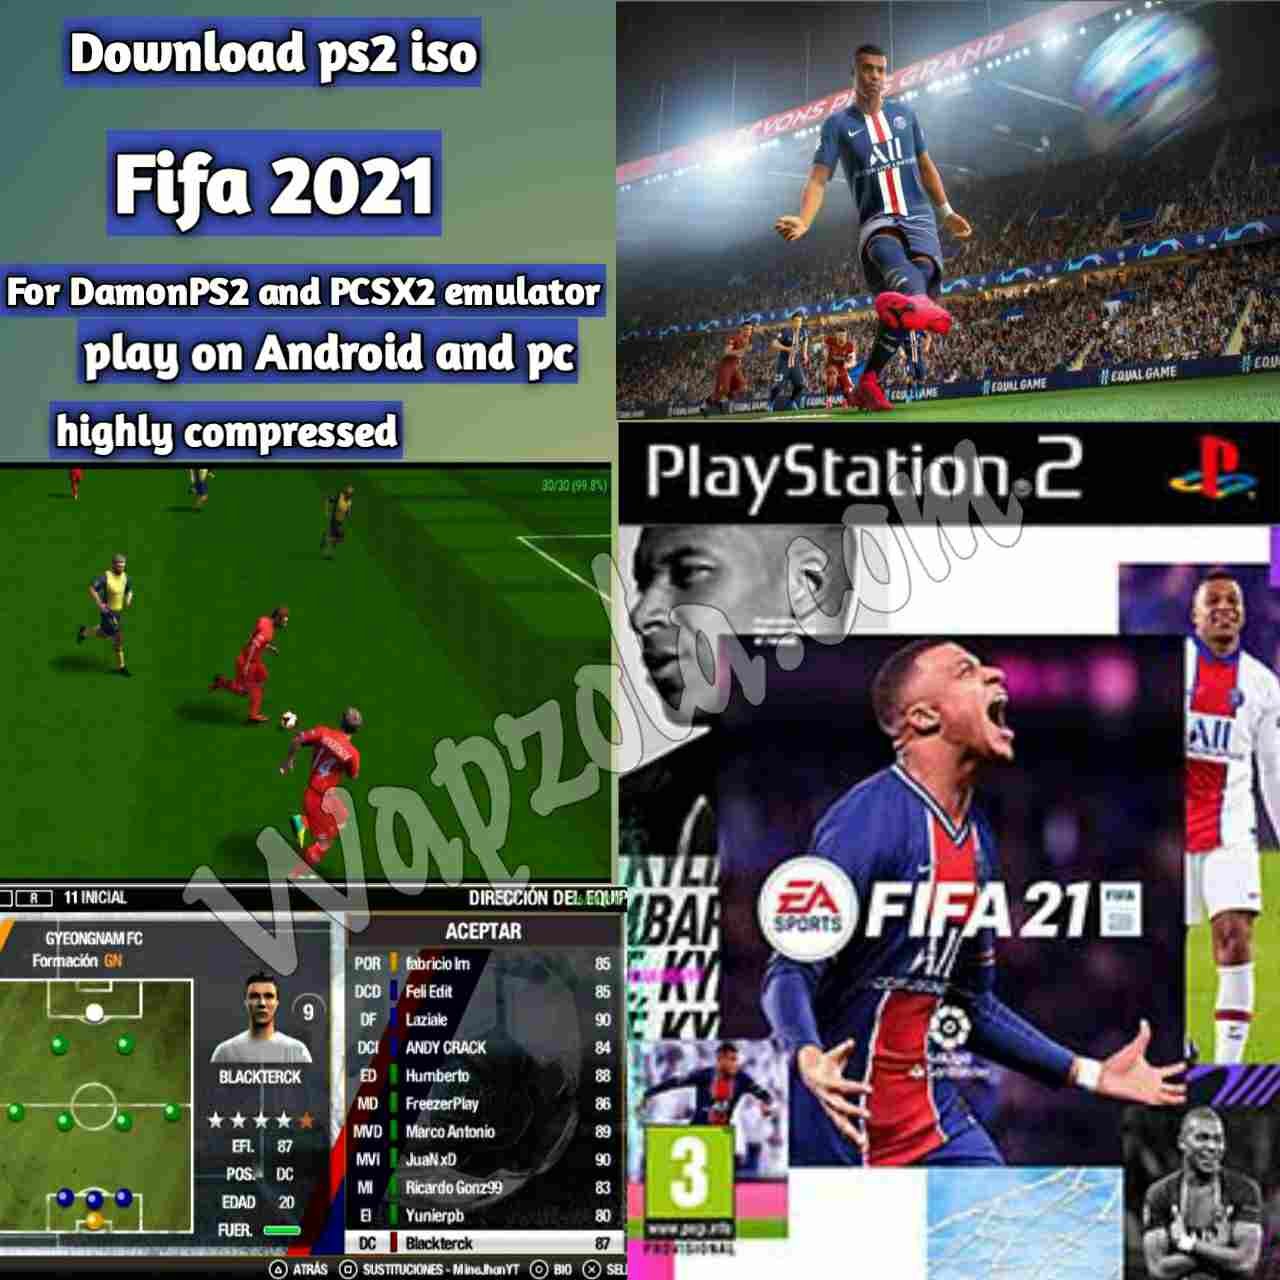 download game pcsx2 iso high compressed